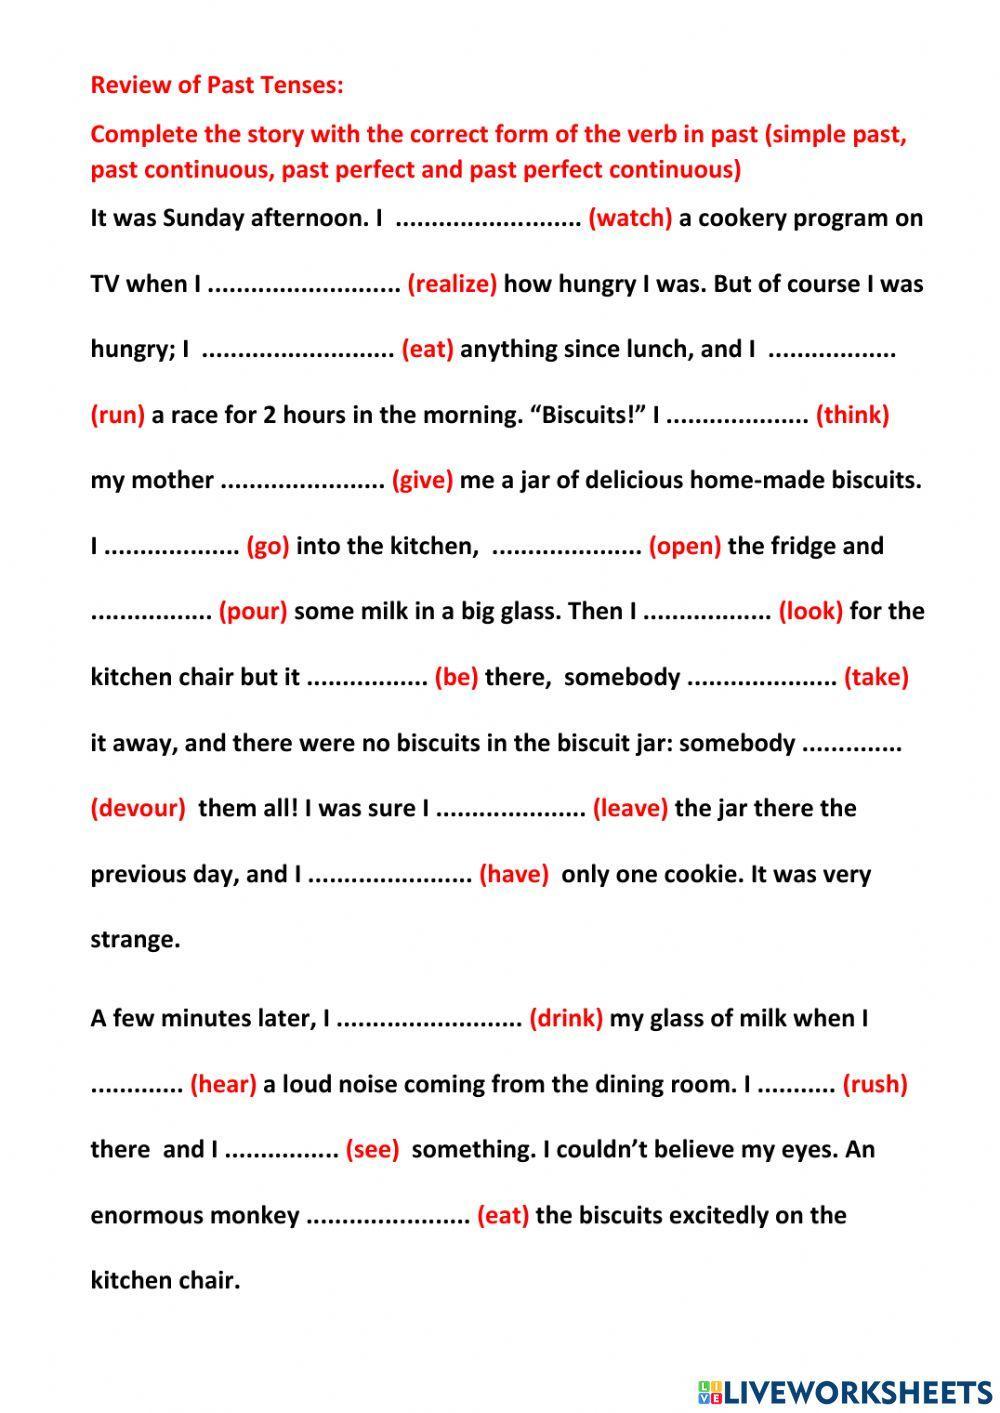 Review of Past tenses